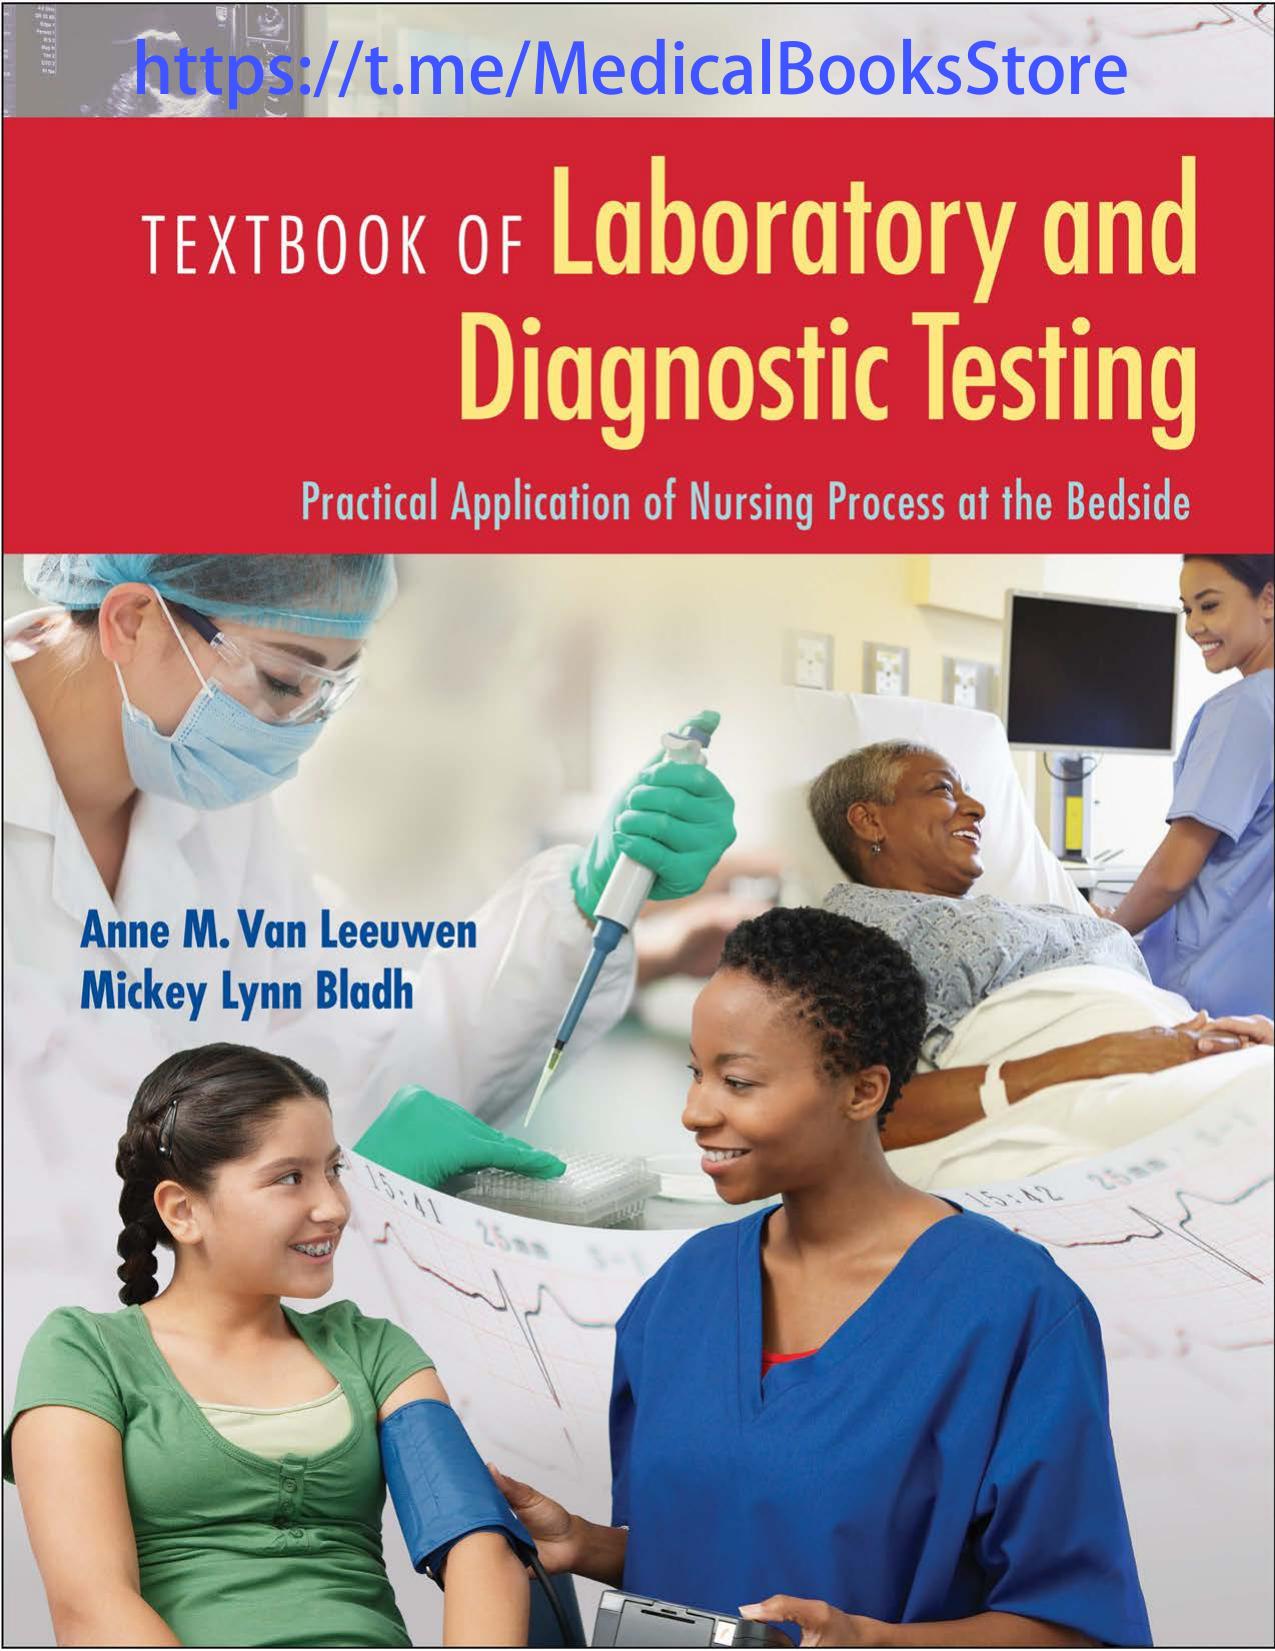 TEXTBOOKOF LABORATORY AND DIAGNOSTIC TESTING